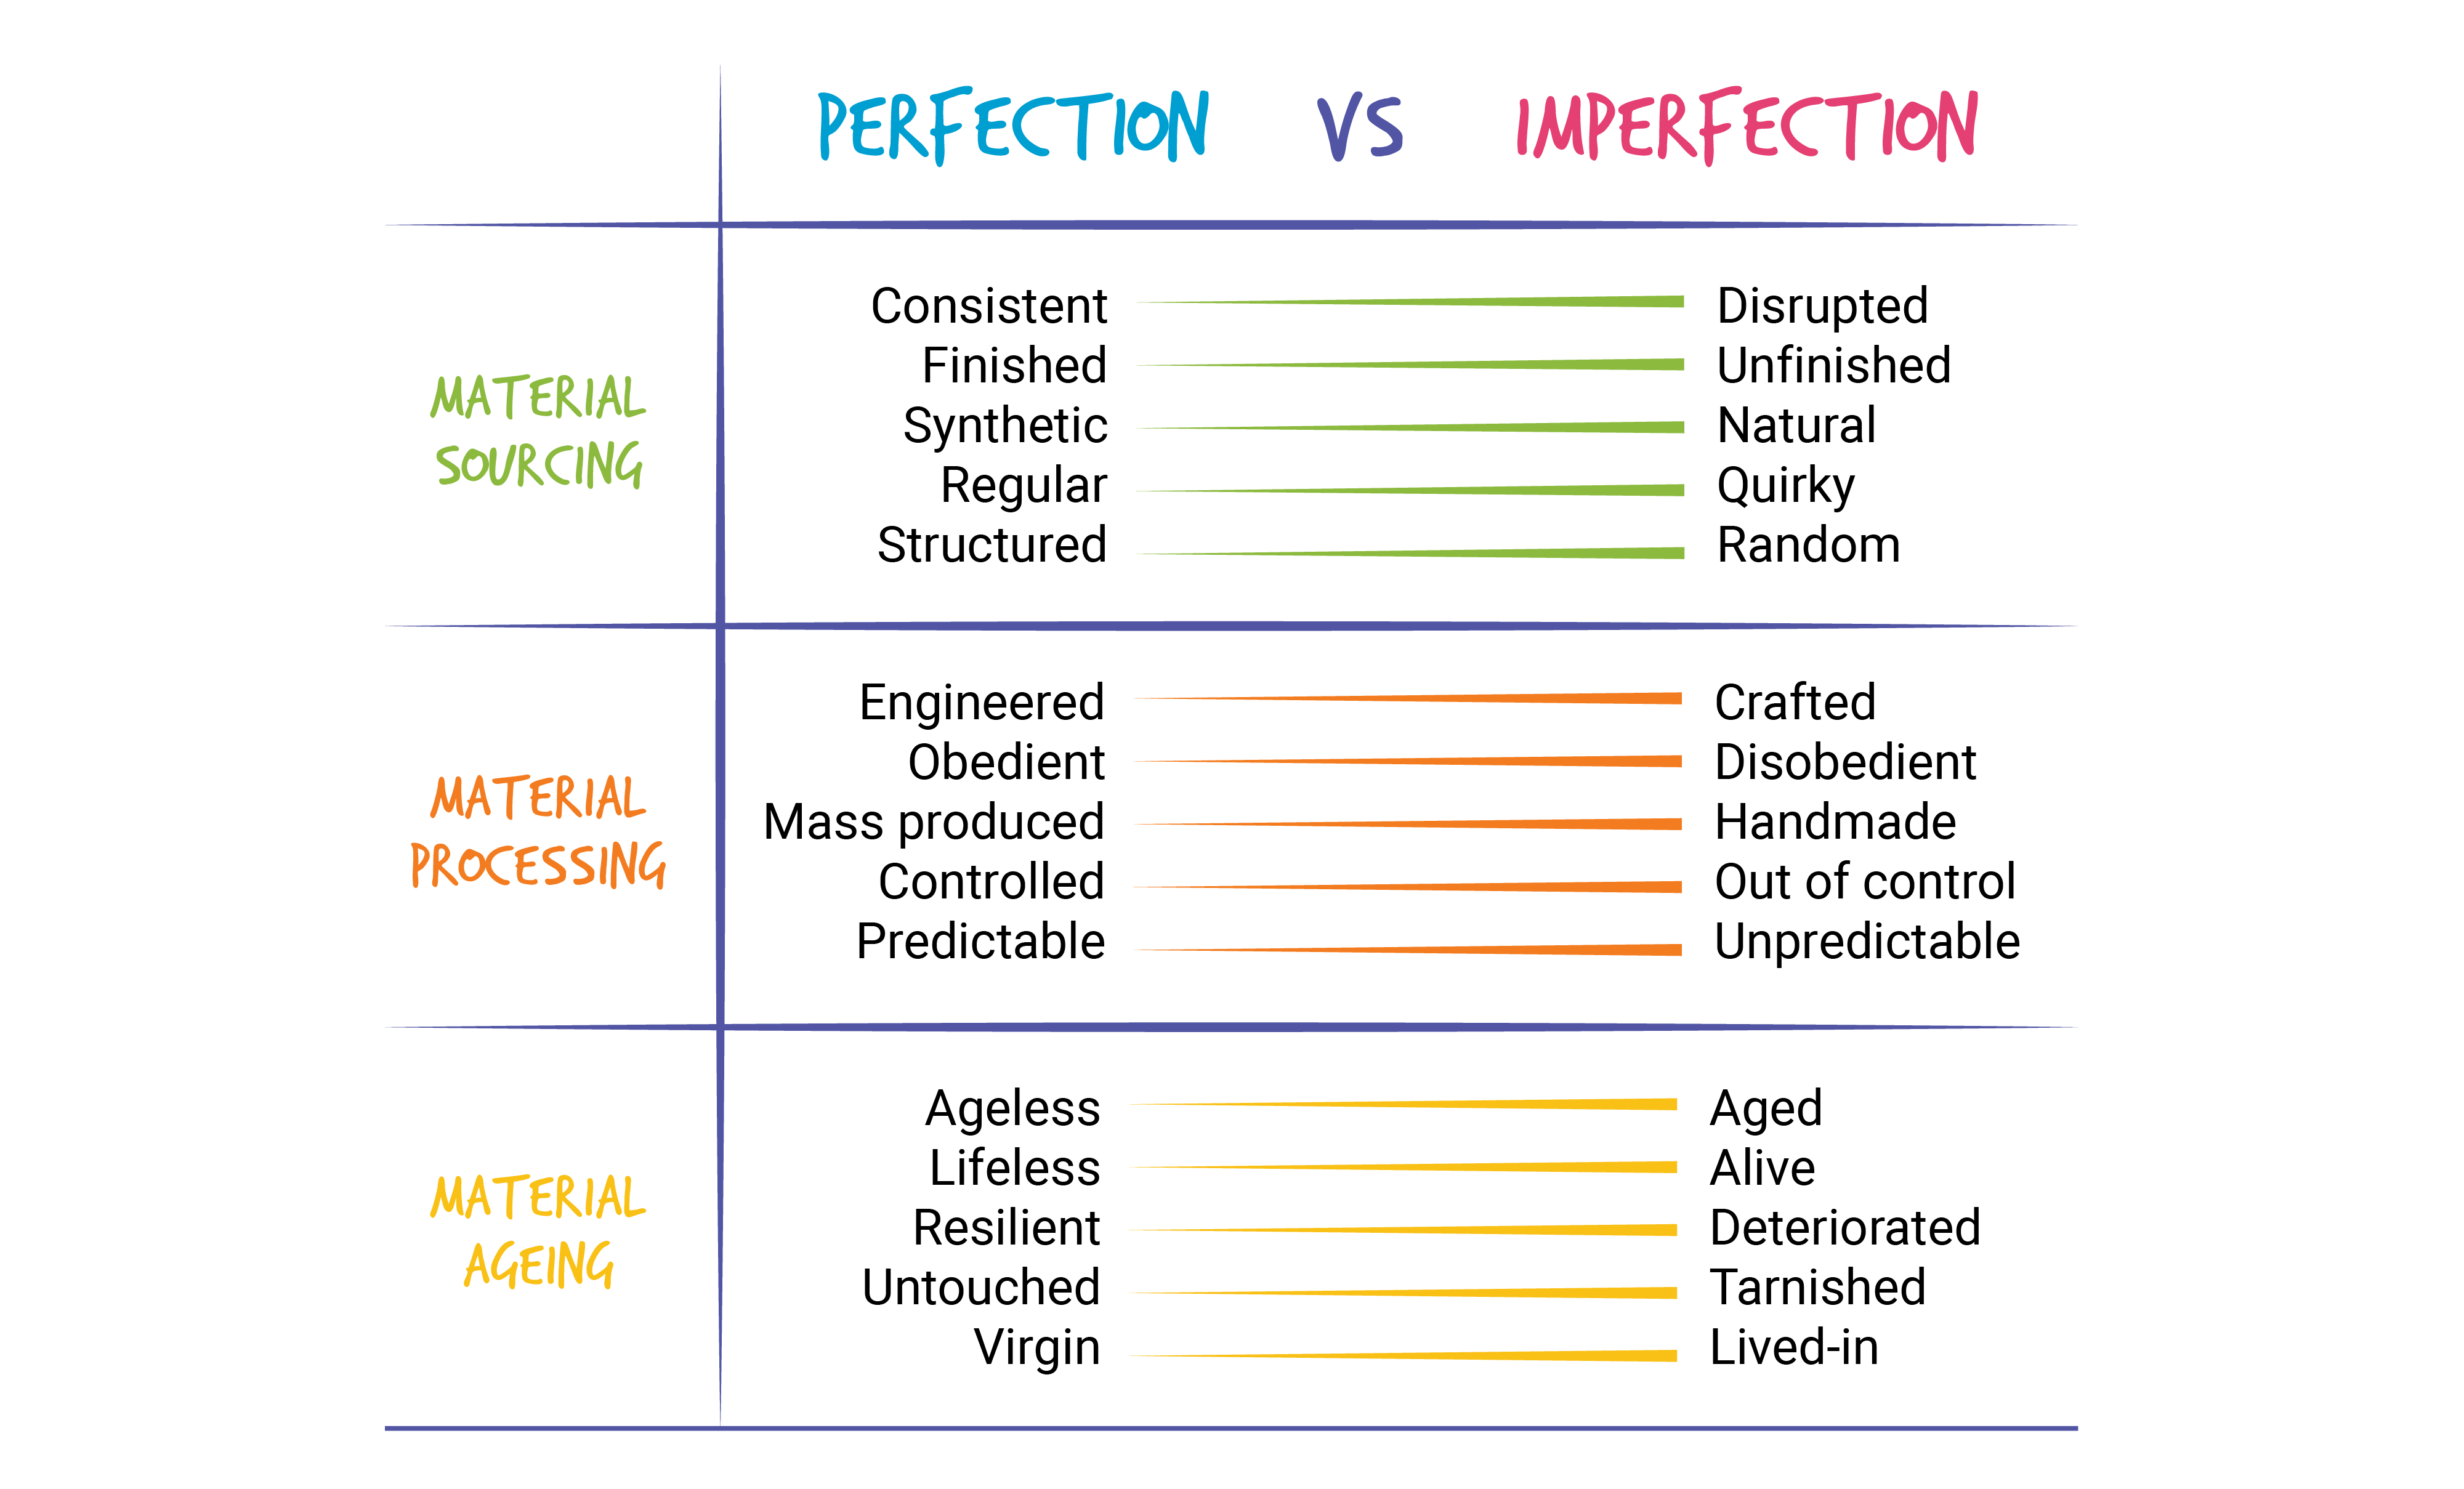 A table with categories Material Sourcing, Material Processing, and Material Ageing in the first column. In the top row, Perfection vs Imperfection. Under Material Sourcing, in the second row: Consistent to Disrupted, Finished to Unfinished, Synthetic to Natural, Regular to Quirky, Structured to Random. Under Material Processing, in the third row: Engineered to Crafted, Obedient to Disobedient, Mass produced to Handmade, Controlled to Out of control, Predictable to Unpredictable. Under Material Ageing in the third row: Ageless to Aged, Lifeless to Alive, Resilient to Deteriorated, Untouched to Tarnished, Virgin to Lived-in.